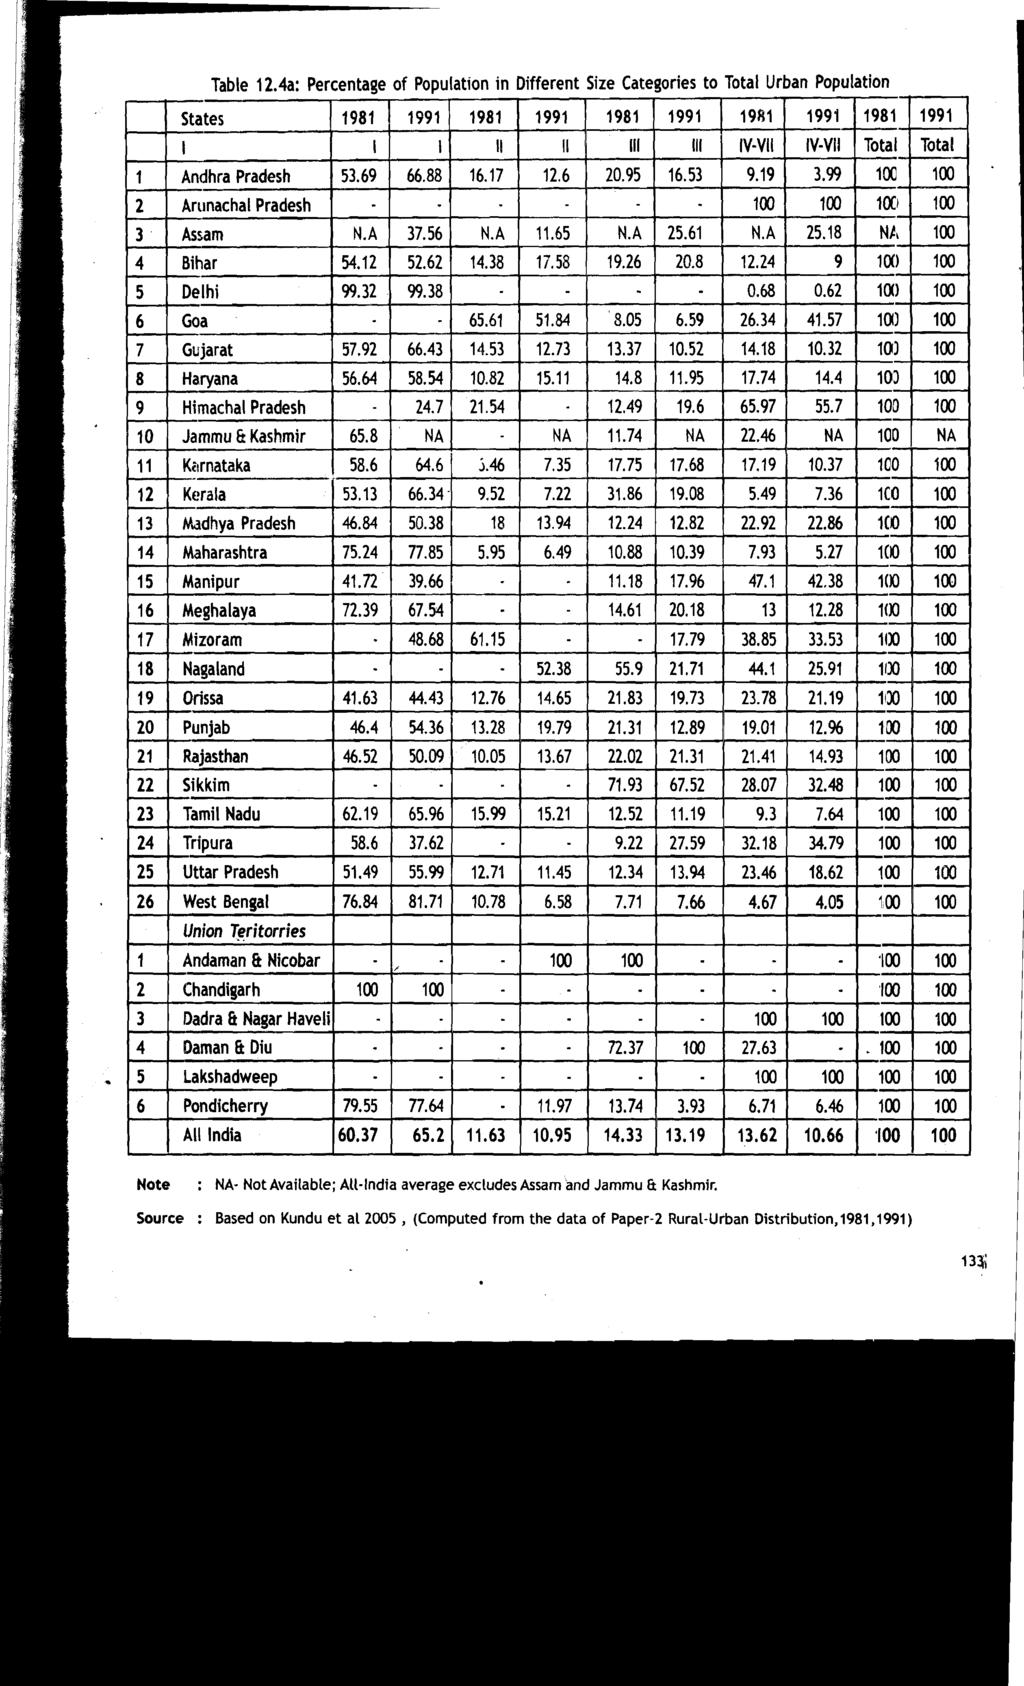 Note : NA- Not Available; All-India average excludes Assam and Jammu 3 Kashmir.